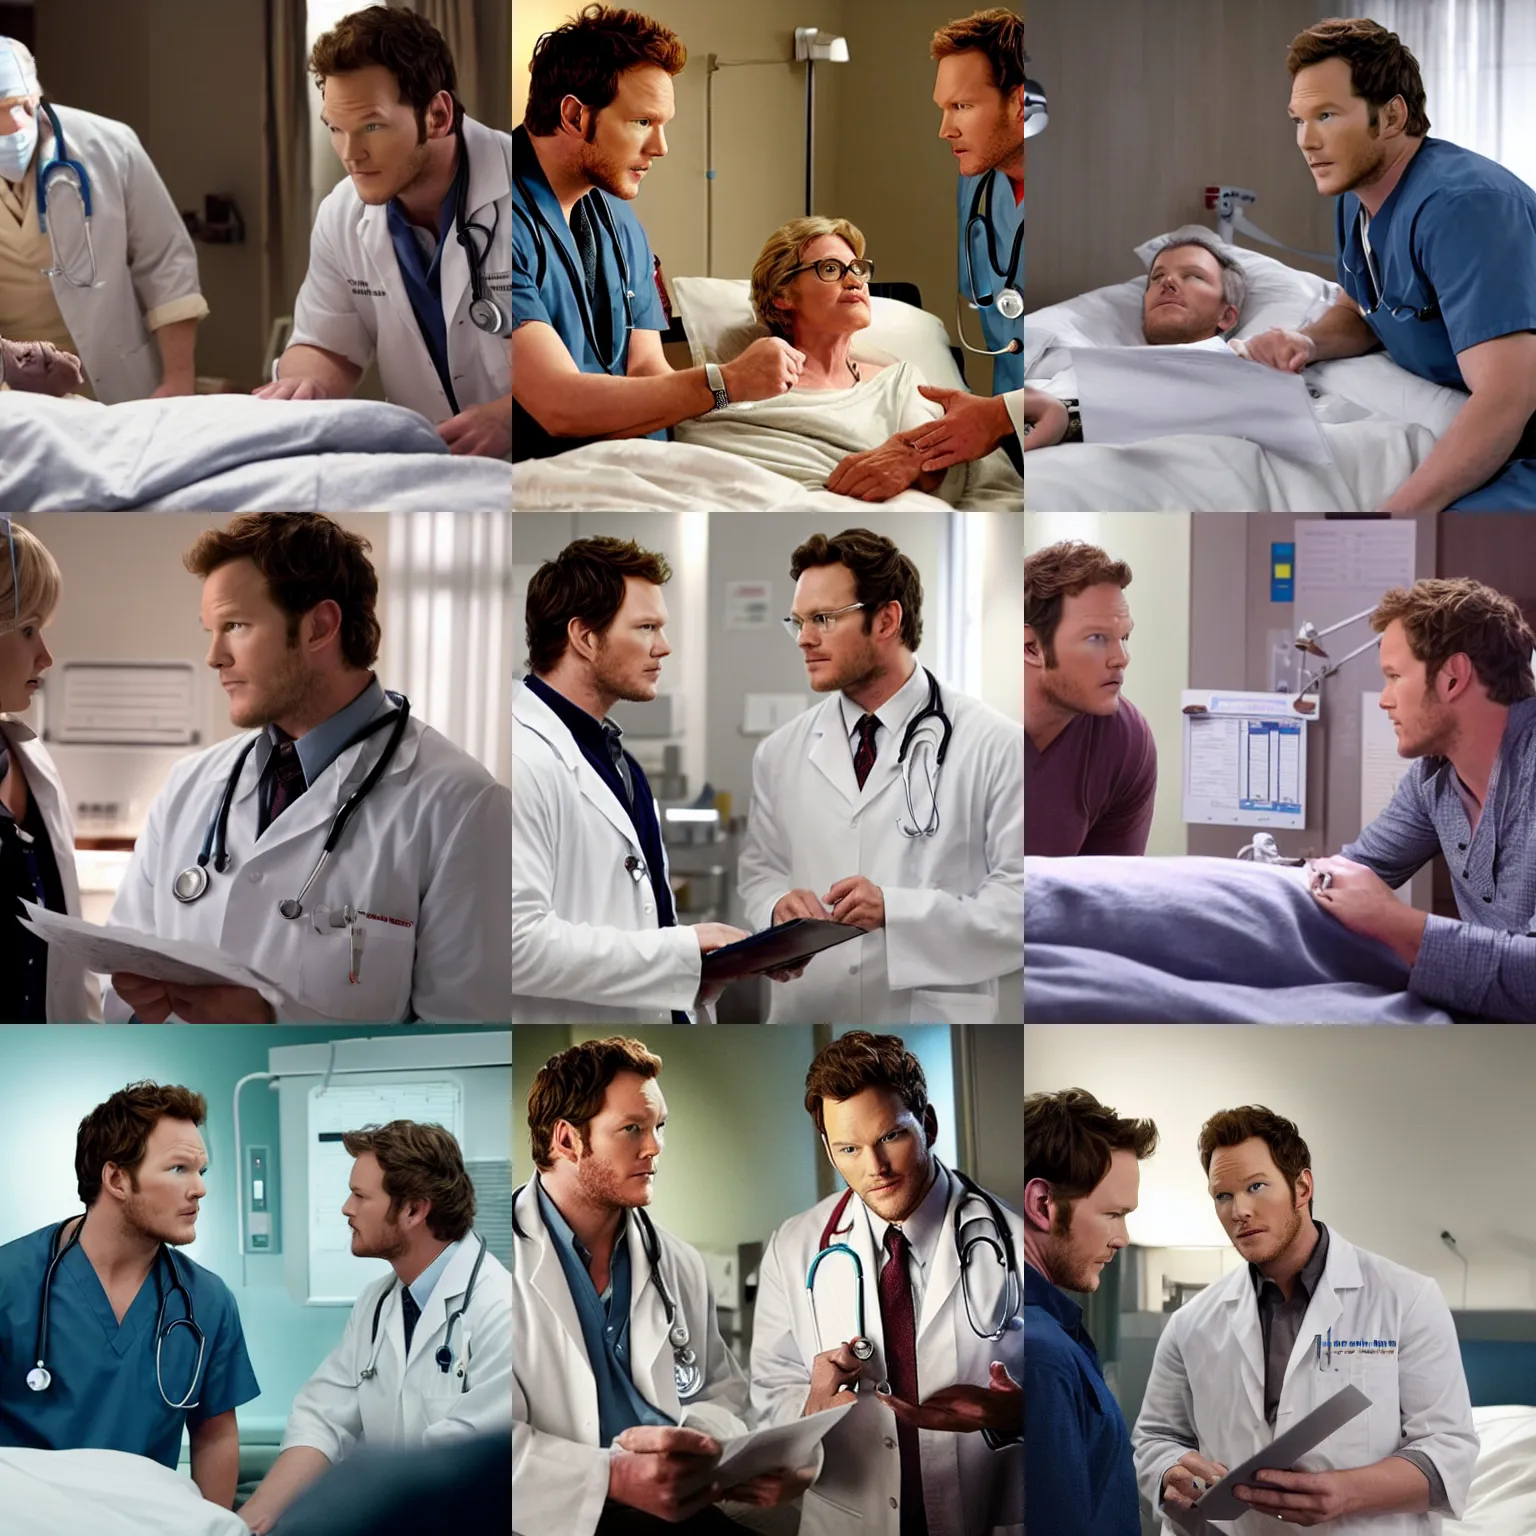 Prompt: a movie scene featuring Chris Pratt as a doctor talking with a patient in bed who is Chris Pratt, a nurse who is Chris Pratt stands nearby with a chart, directed by Stephen Spielberg